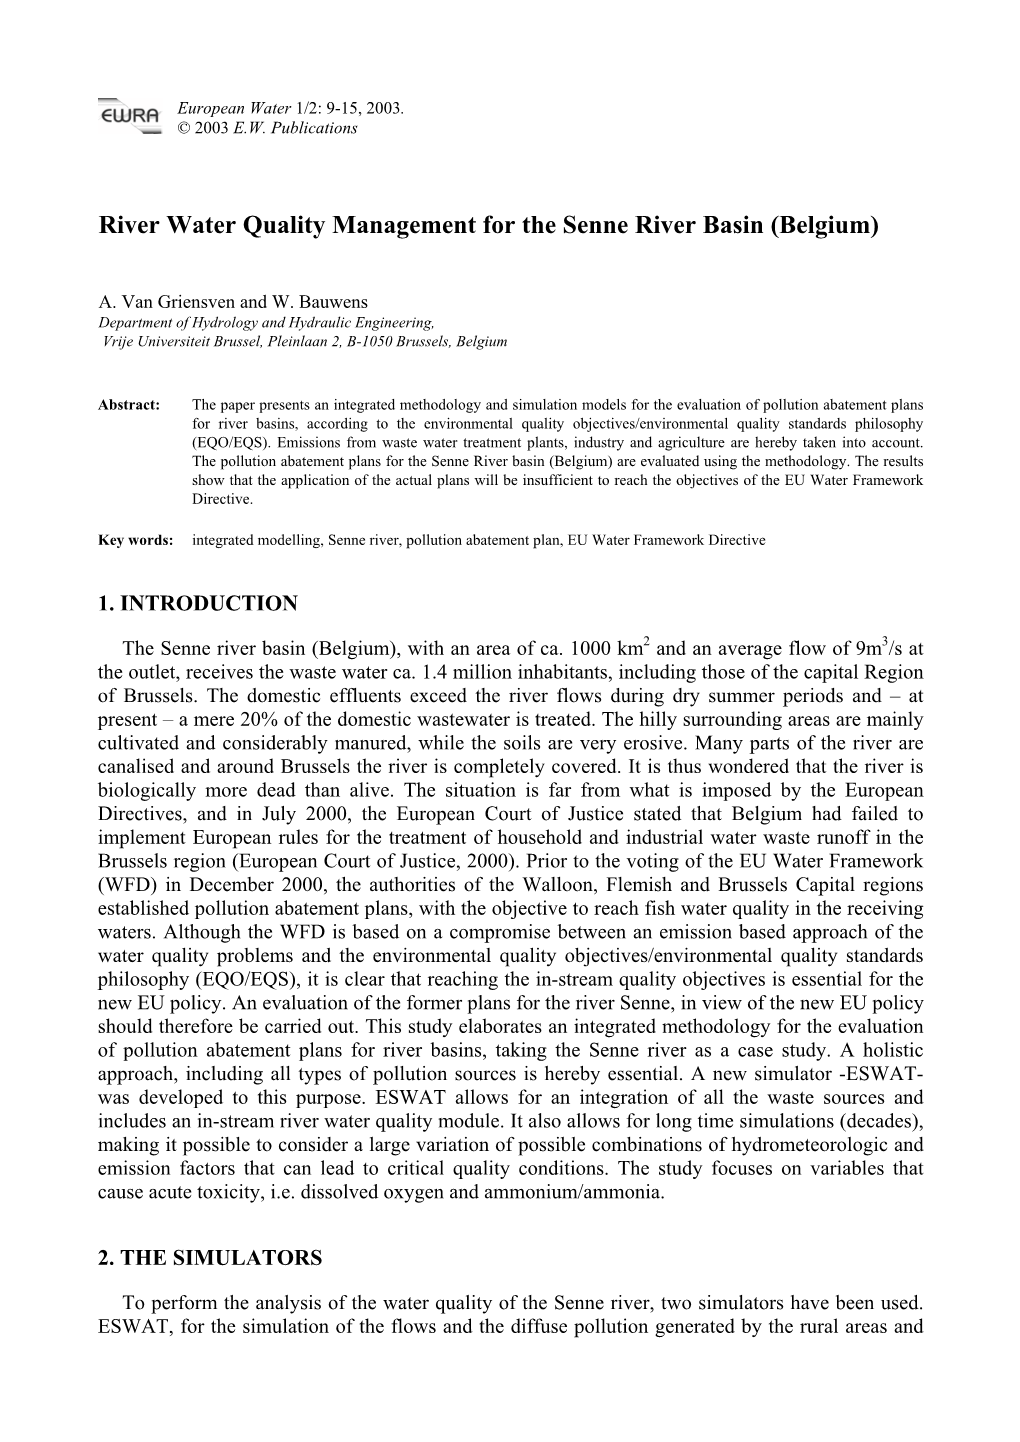 River Water Quality Management for the Senne River Basin (Belgium)